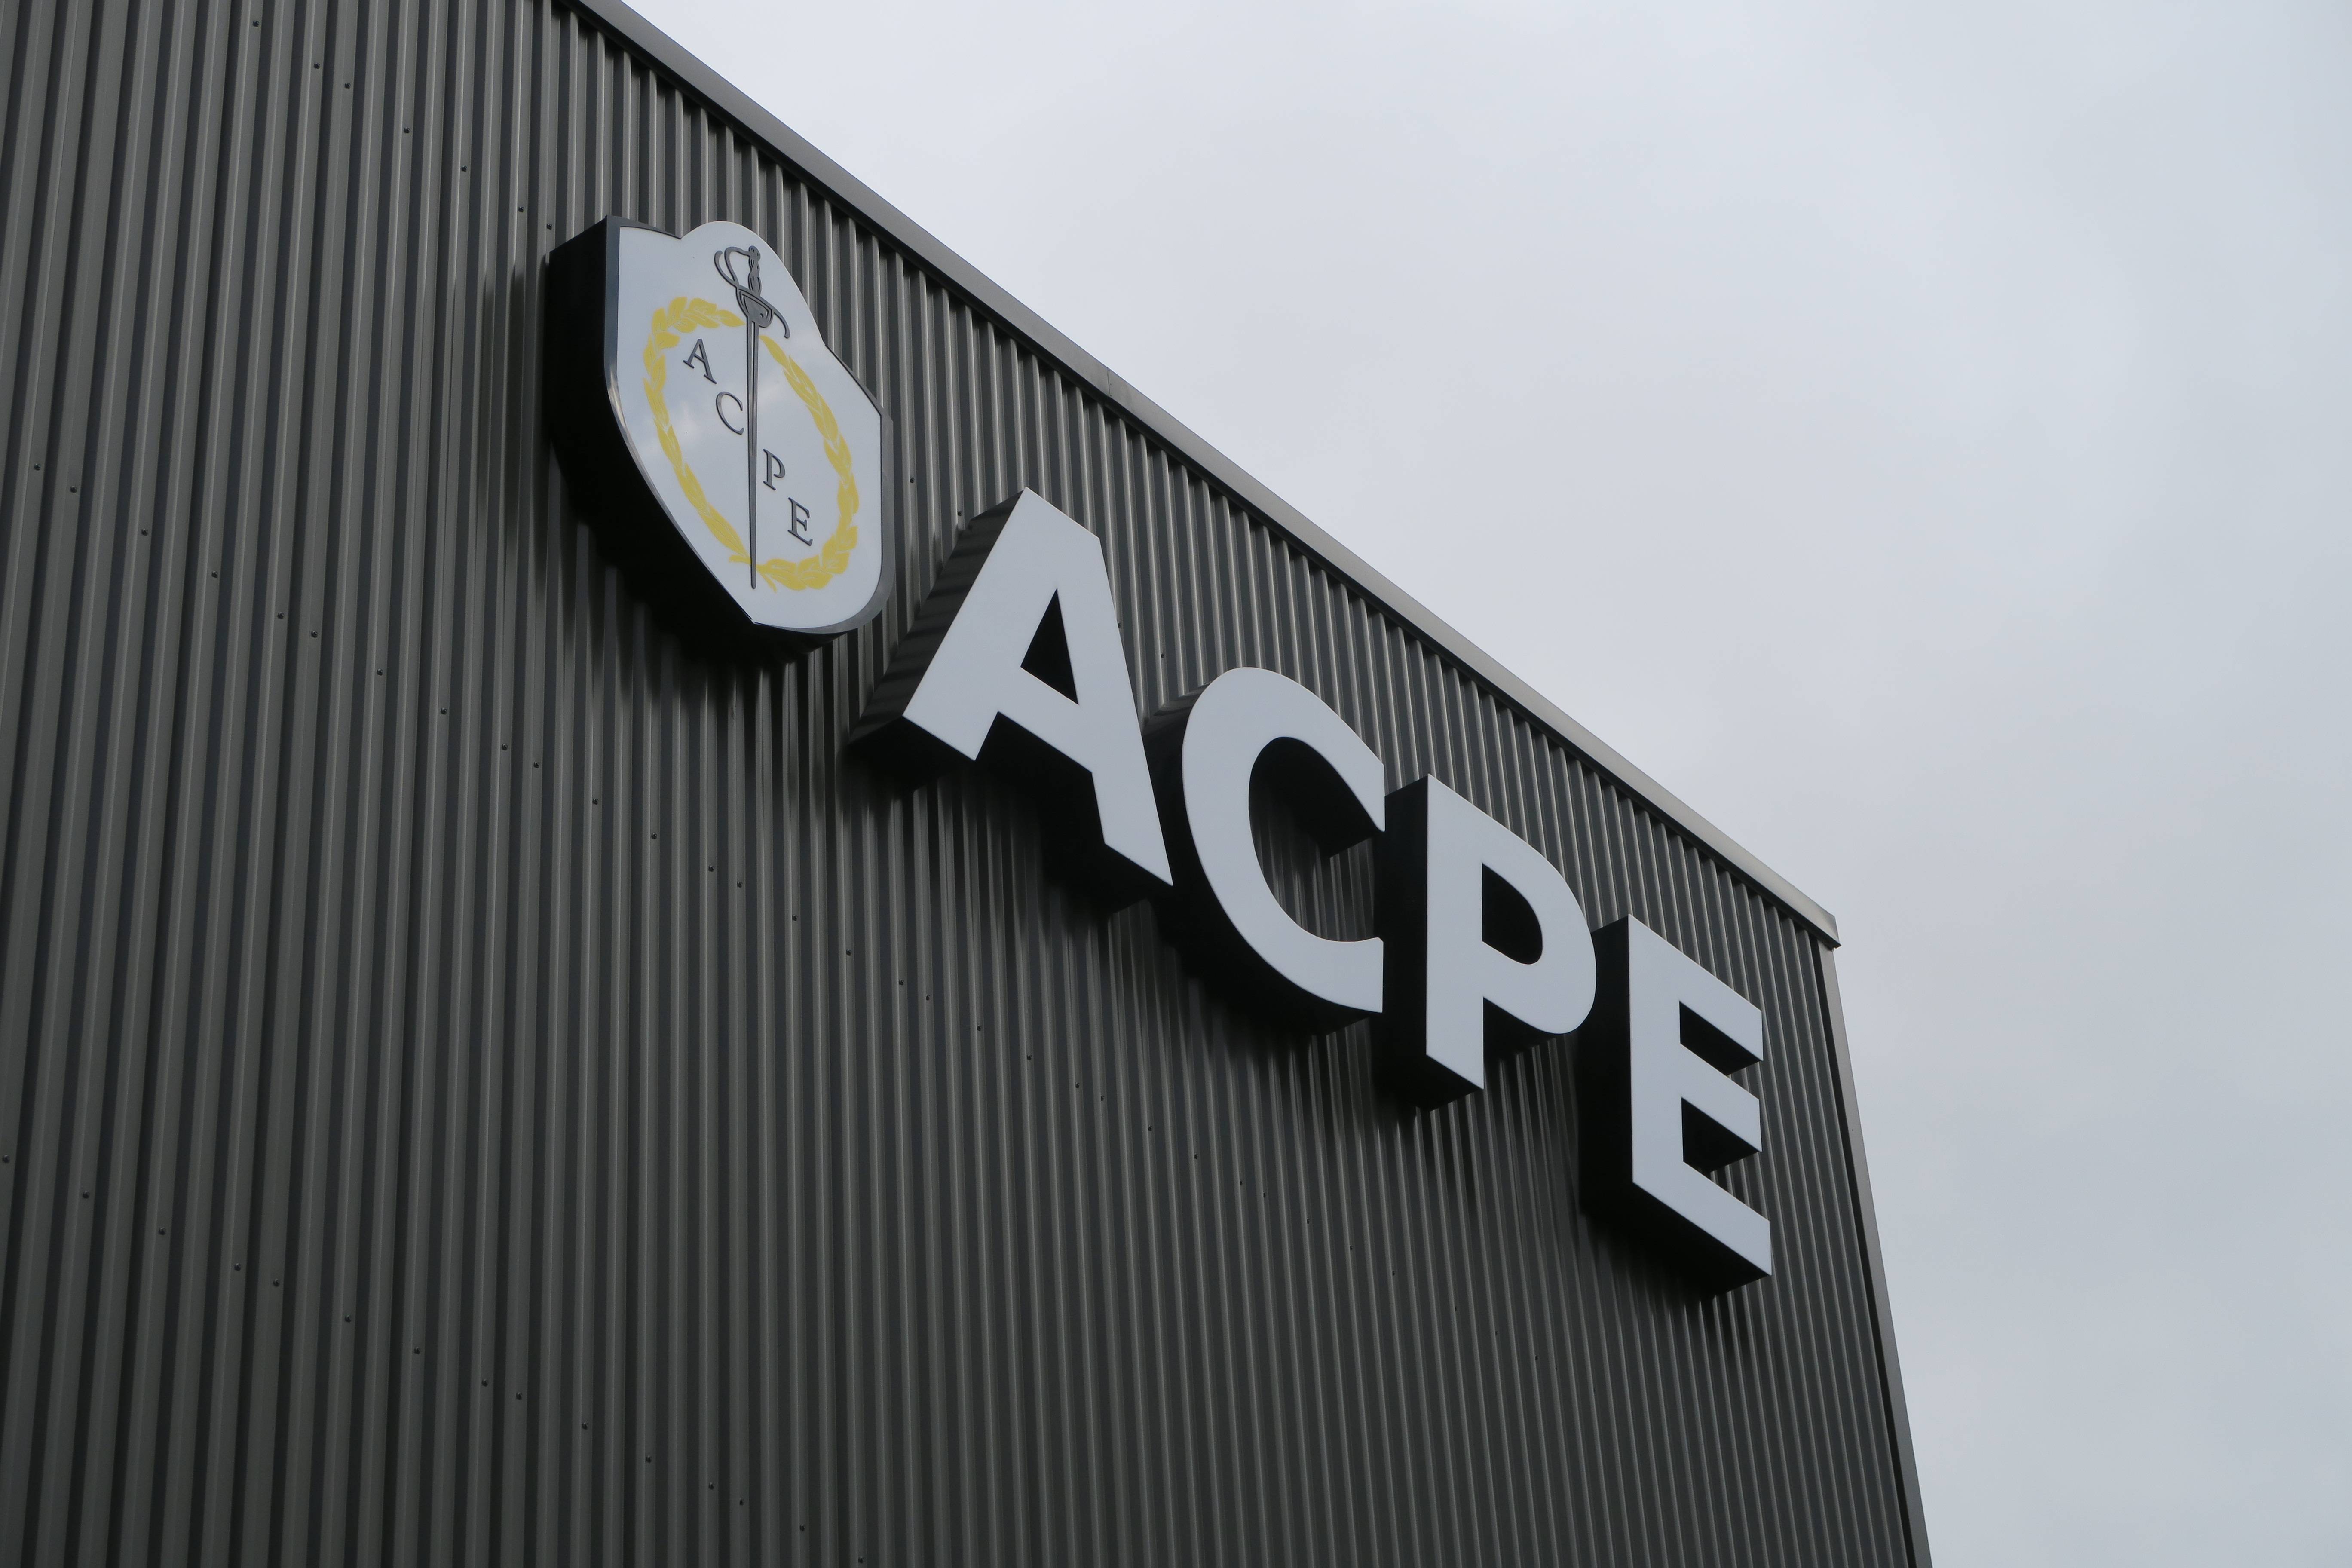 ACPE Fabricated Letters